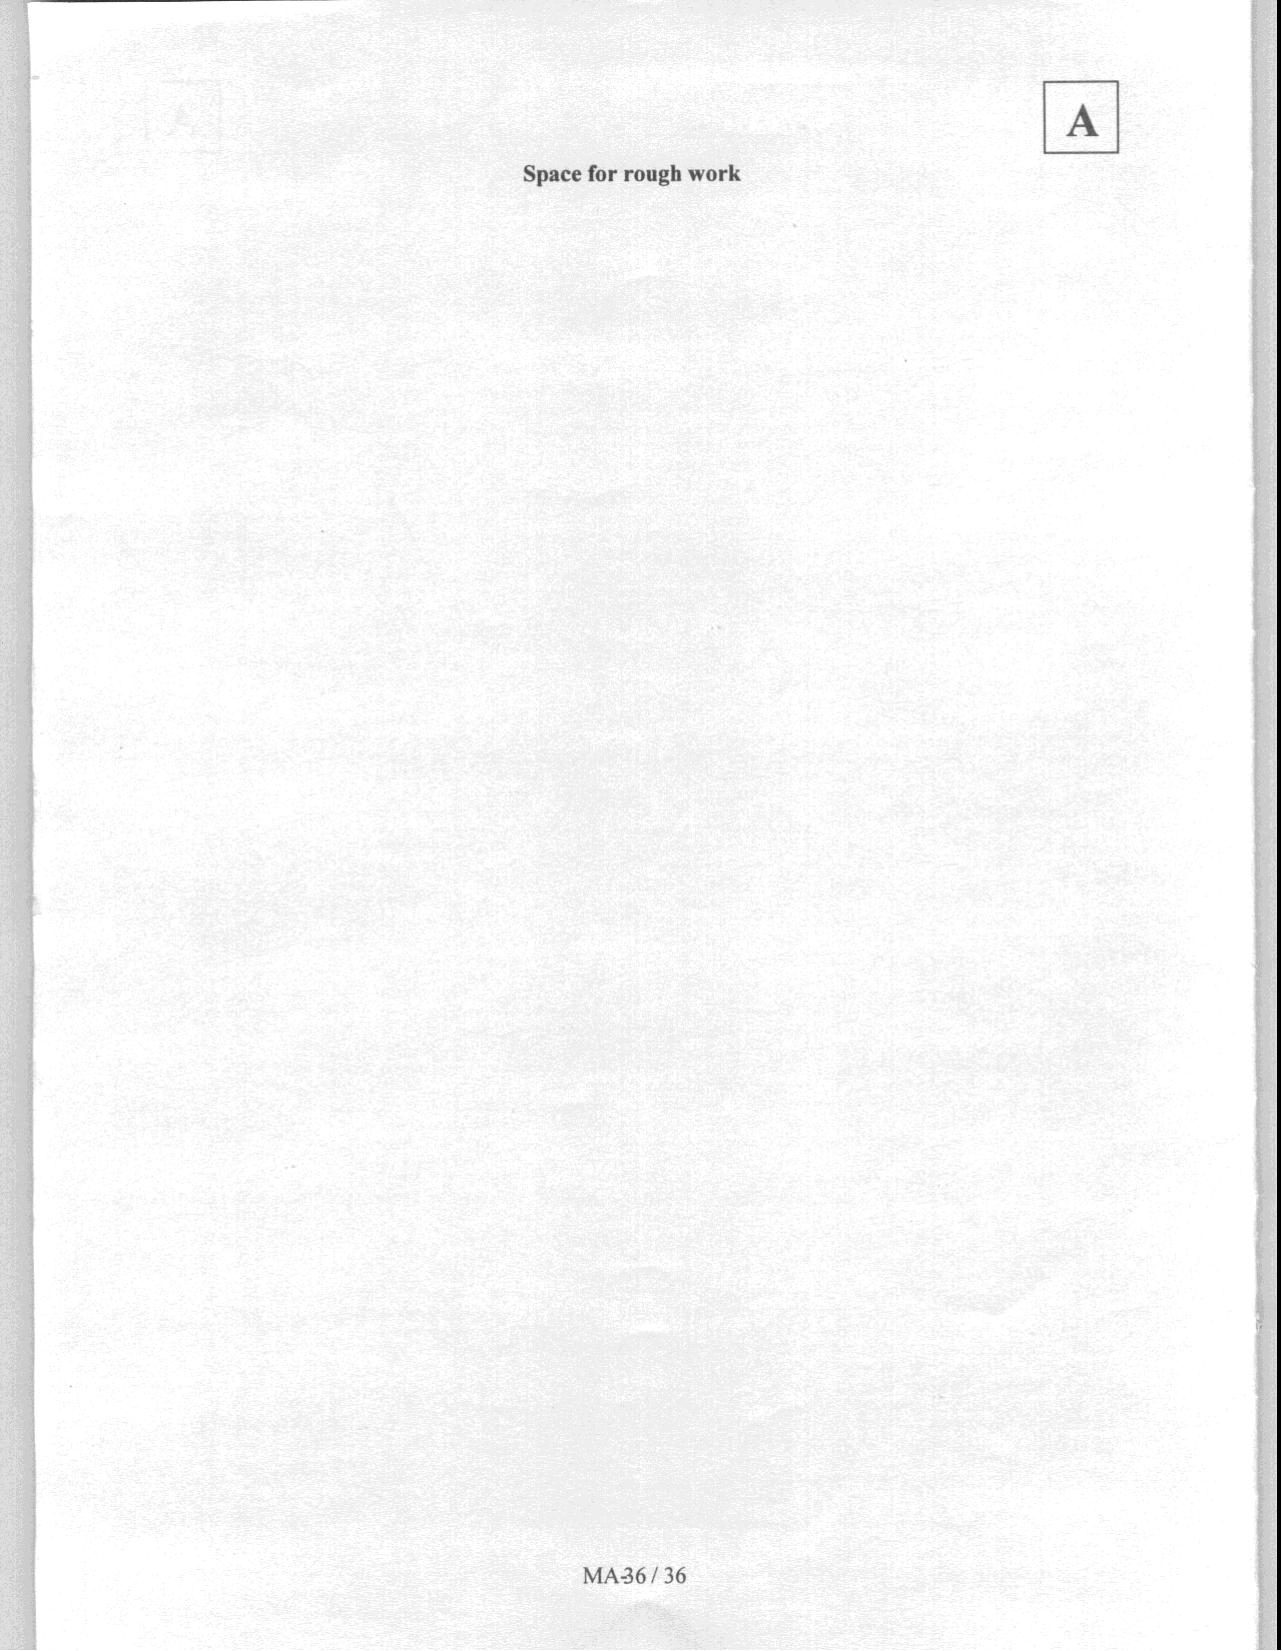 JAM 2008: MA Question Paper - Page 38